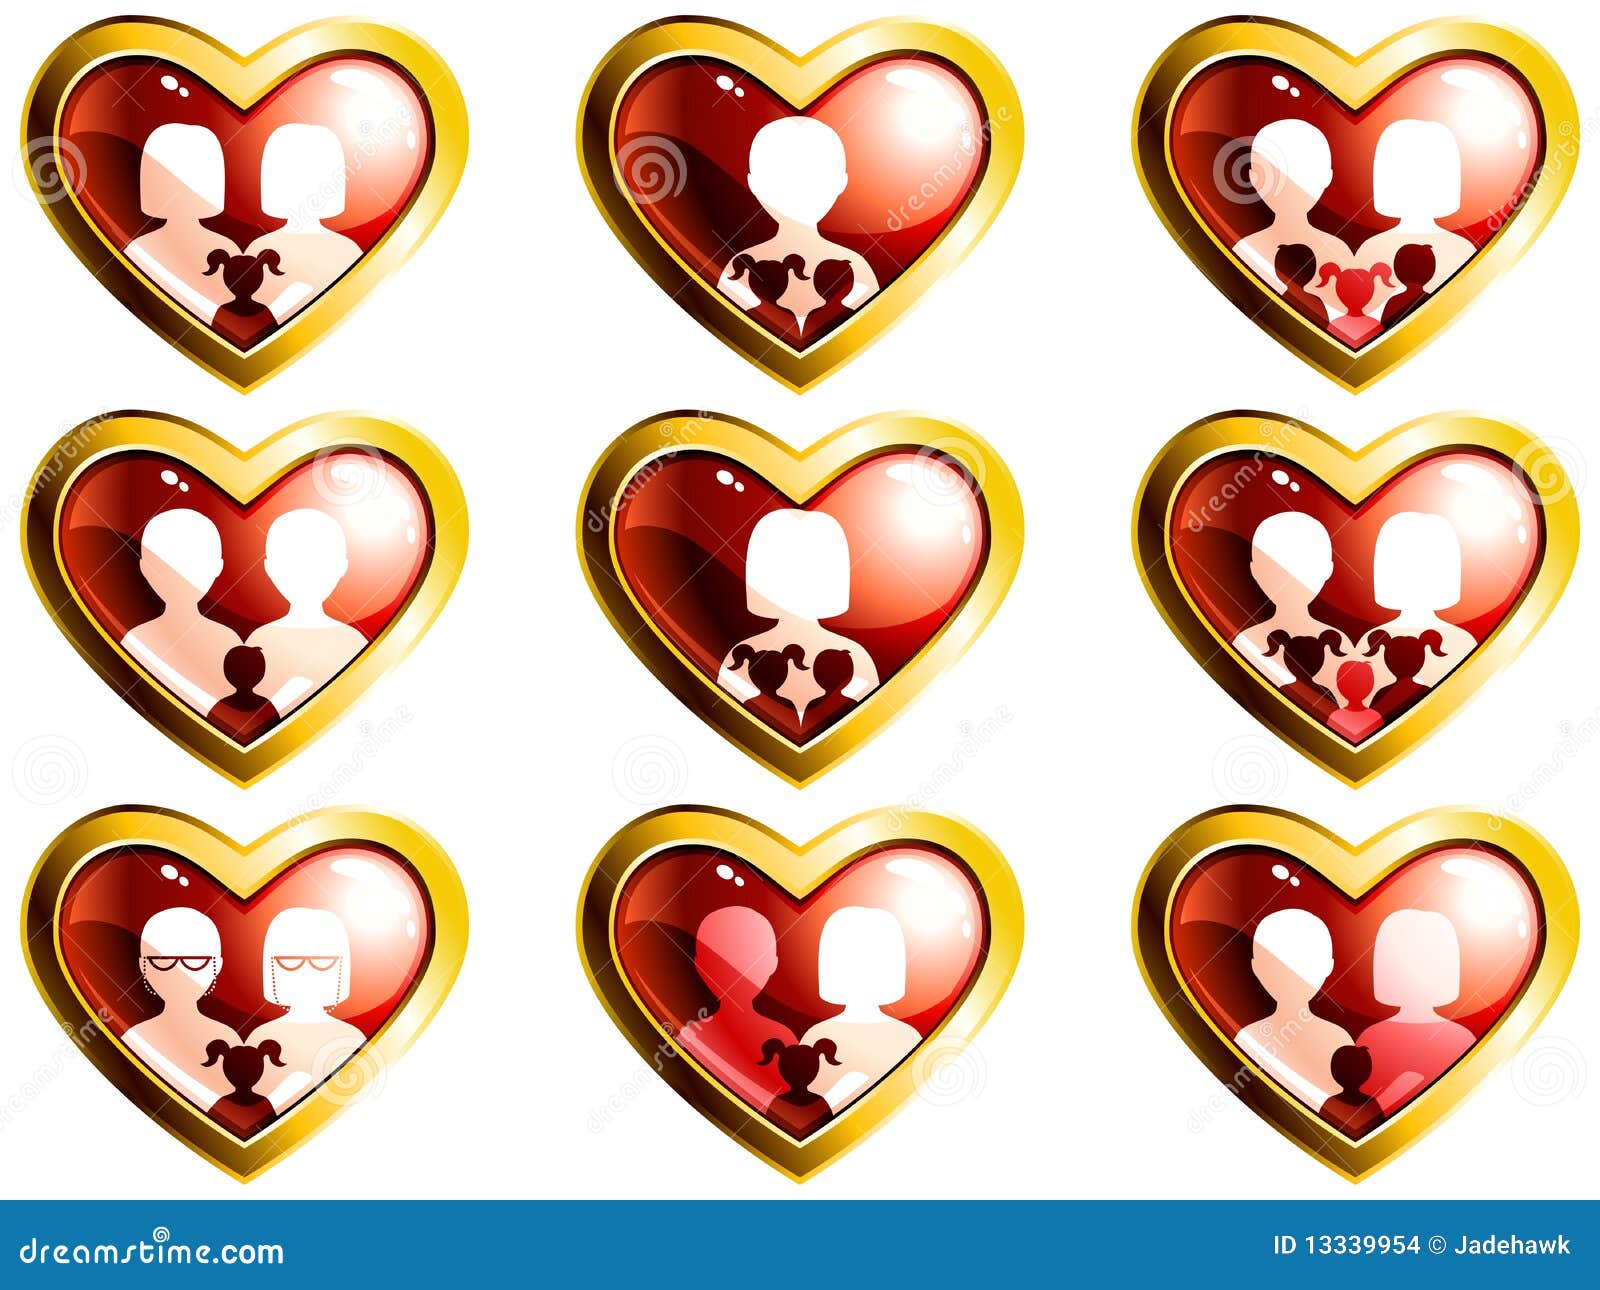 Non-traditional Families Heart-shaped Buttons Stock Vector